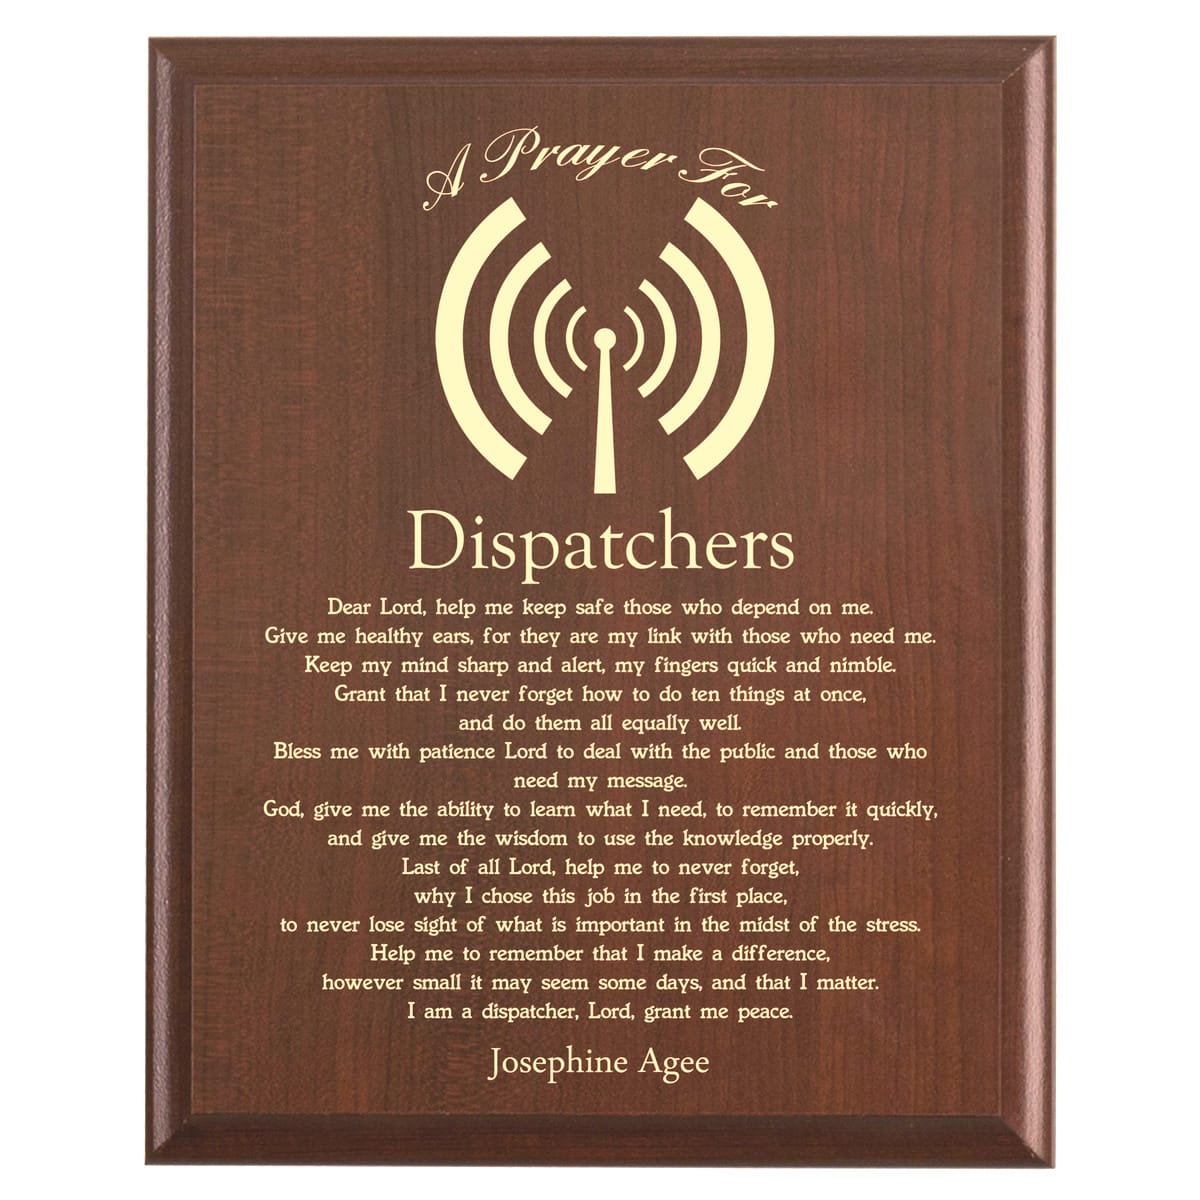 Plaque photo: Dispatcher Prayer Plaque design with free personalization. Wood style finish with customized text.